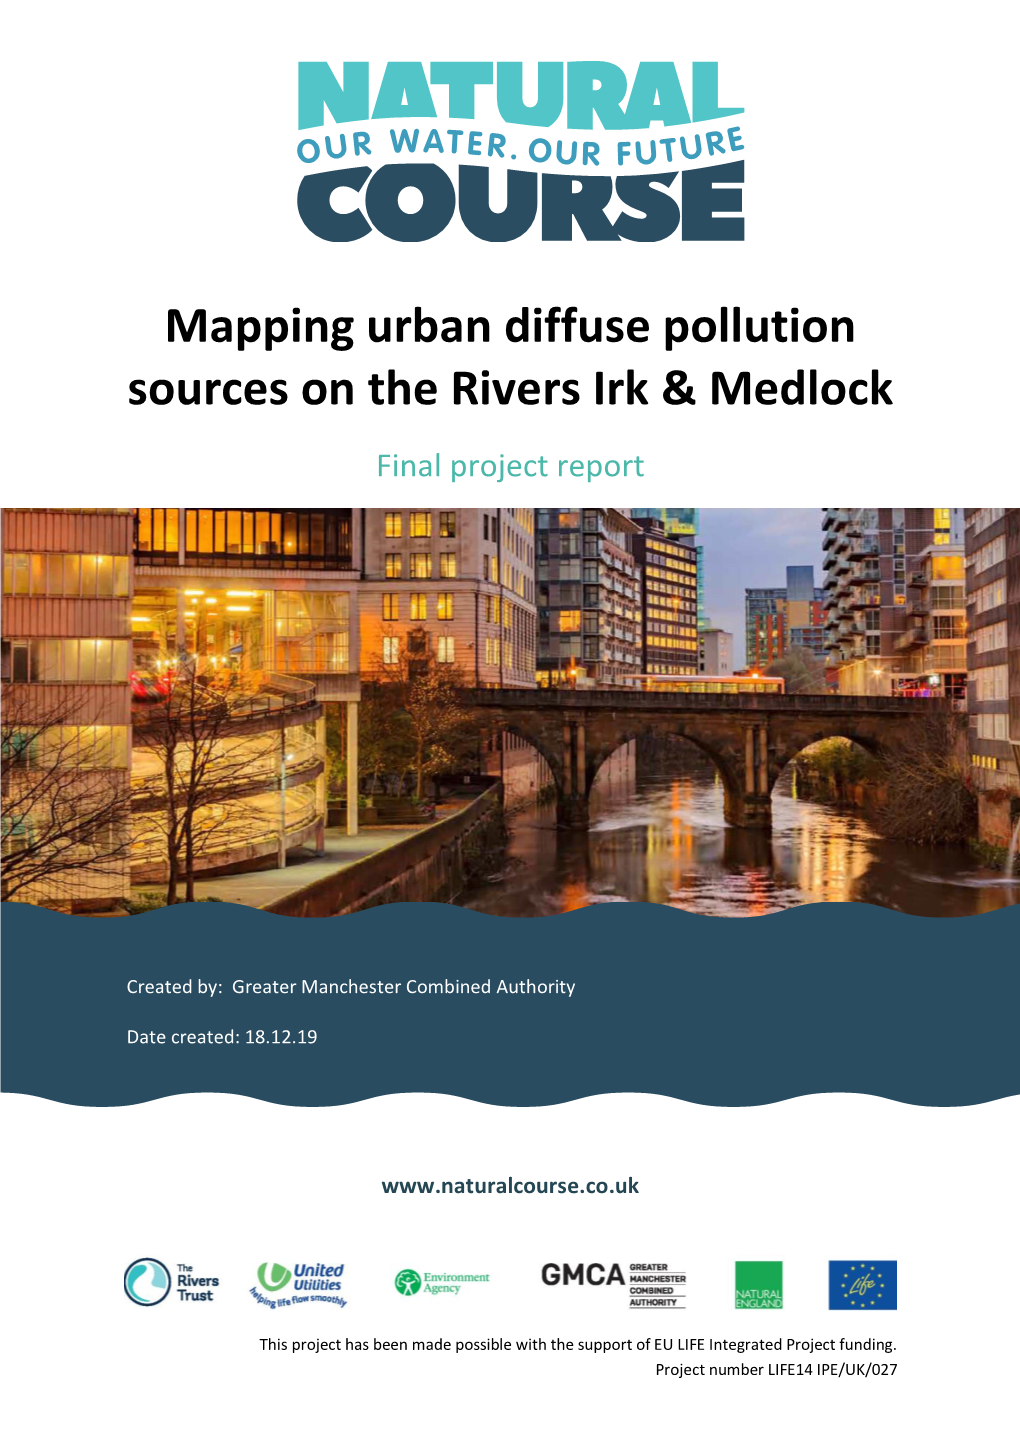 Mapping Urban Diffuse Pollution Sources on the Rivers Irk & Medlock